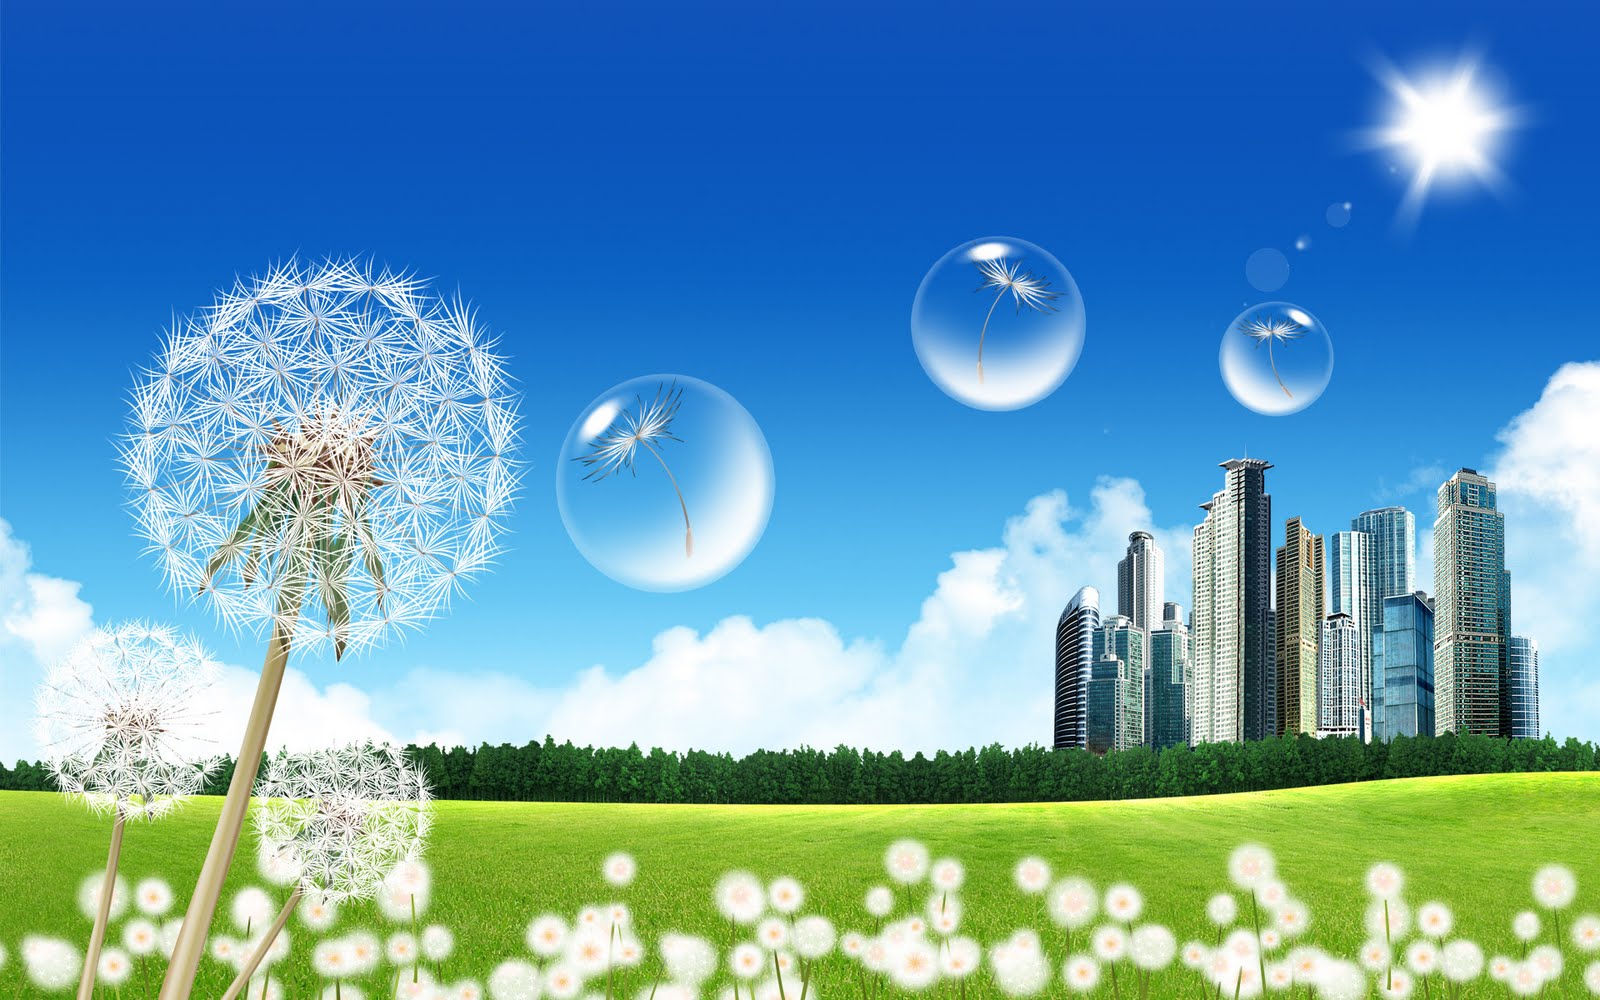 pleasant wallpapers for mobile,sky,dandelion,people in nature,natural landscape,daytime